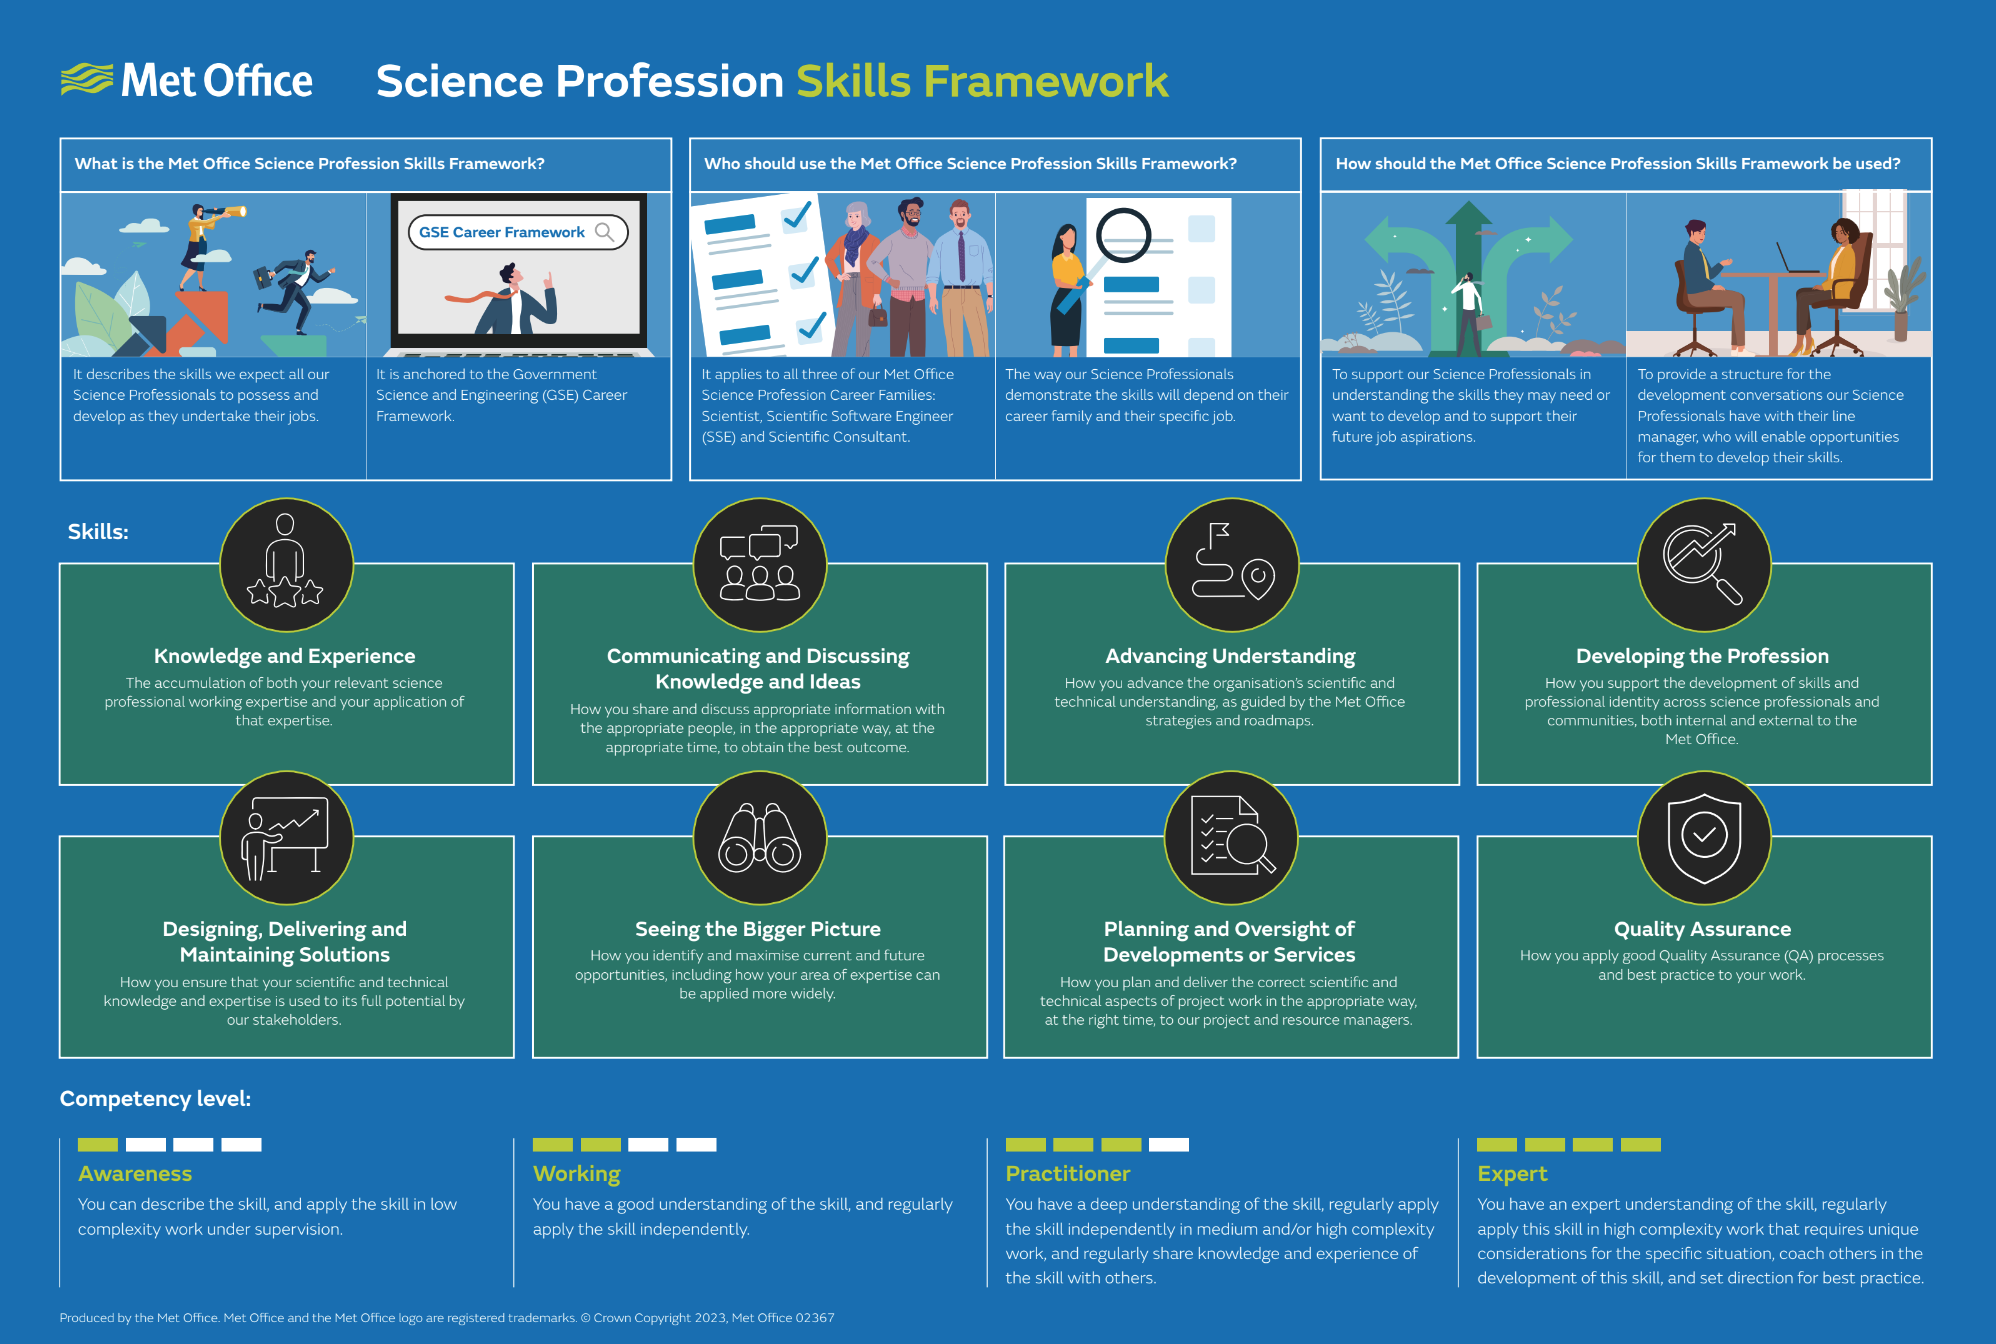 An infographic describing the Met Office Science Profession Skills Framework; all the text from the infographic is included on this web page.